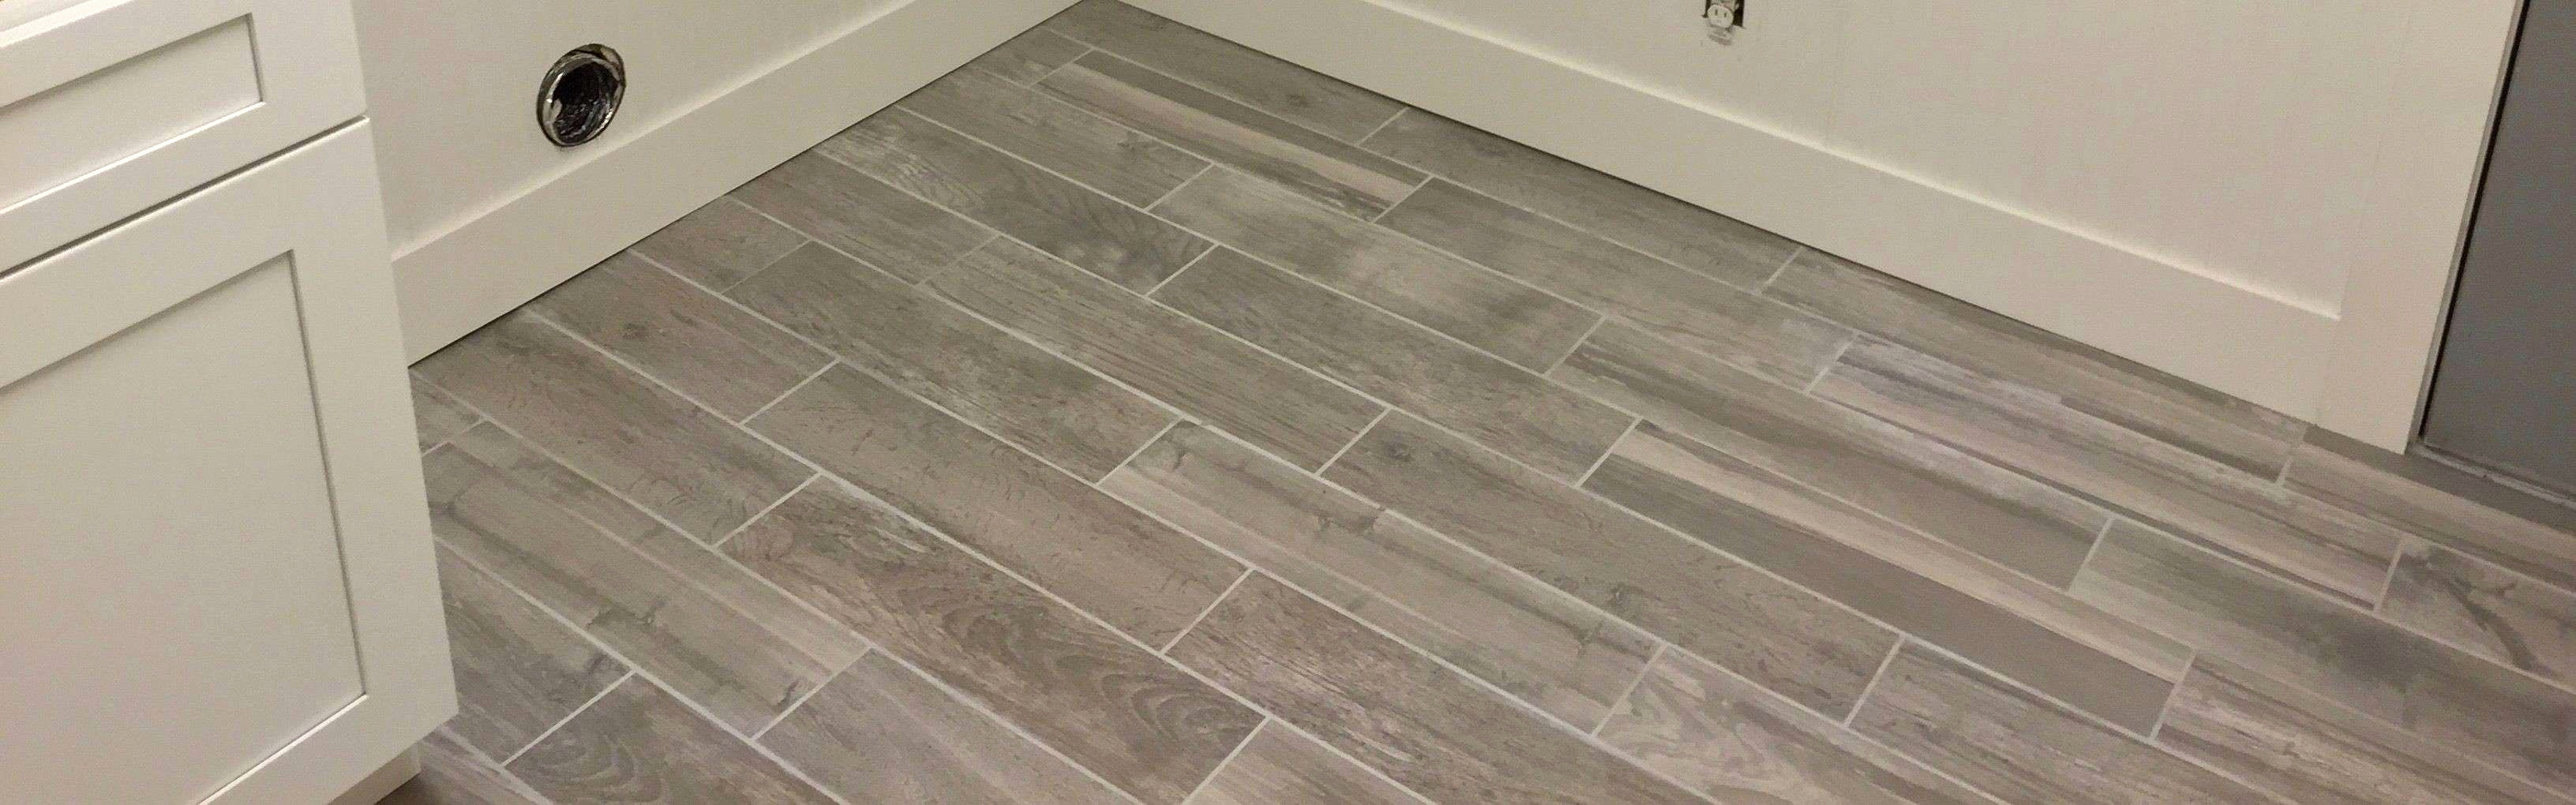 29 Lovely How to Install Floating Hardwood Floors 2024 free download how to install floating hardwood floors of floating hardwood floor transition from tile to wood floors light to in unique bathroom tiling ideas best h sink install bathroom i 0d exciting bea